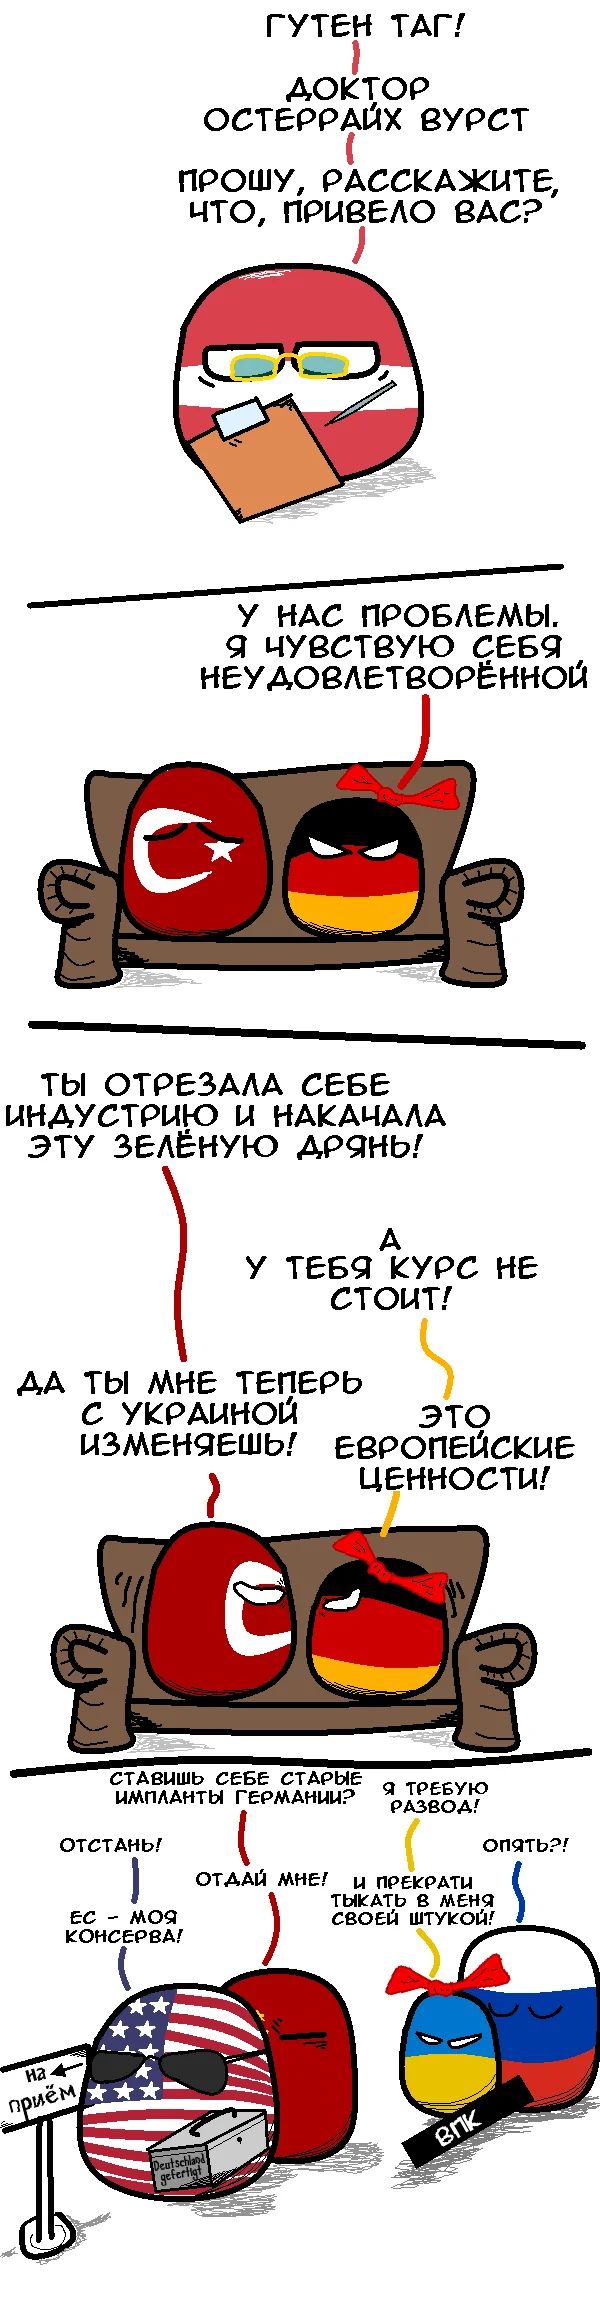 Family matters - My, Comics, Countryballs, Picture with text, VKontakte (link), Politics, Digest, Longpost